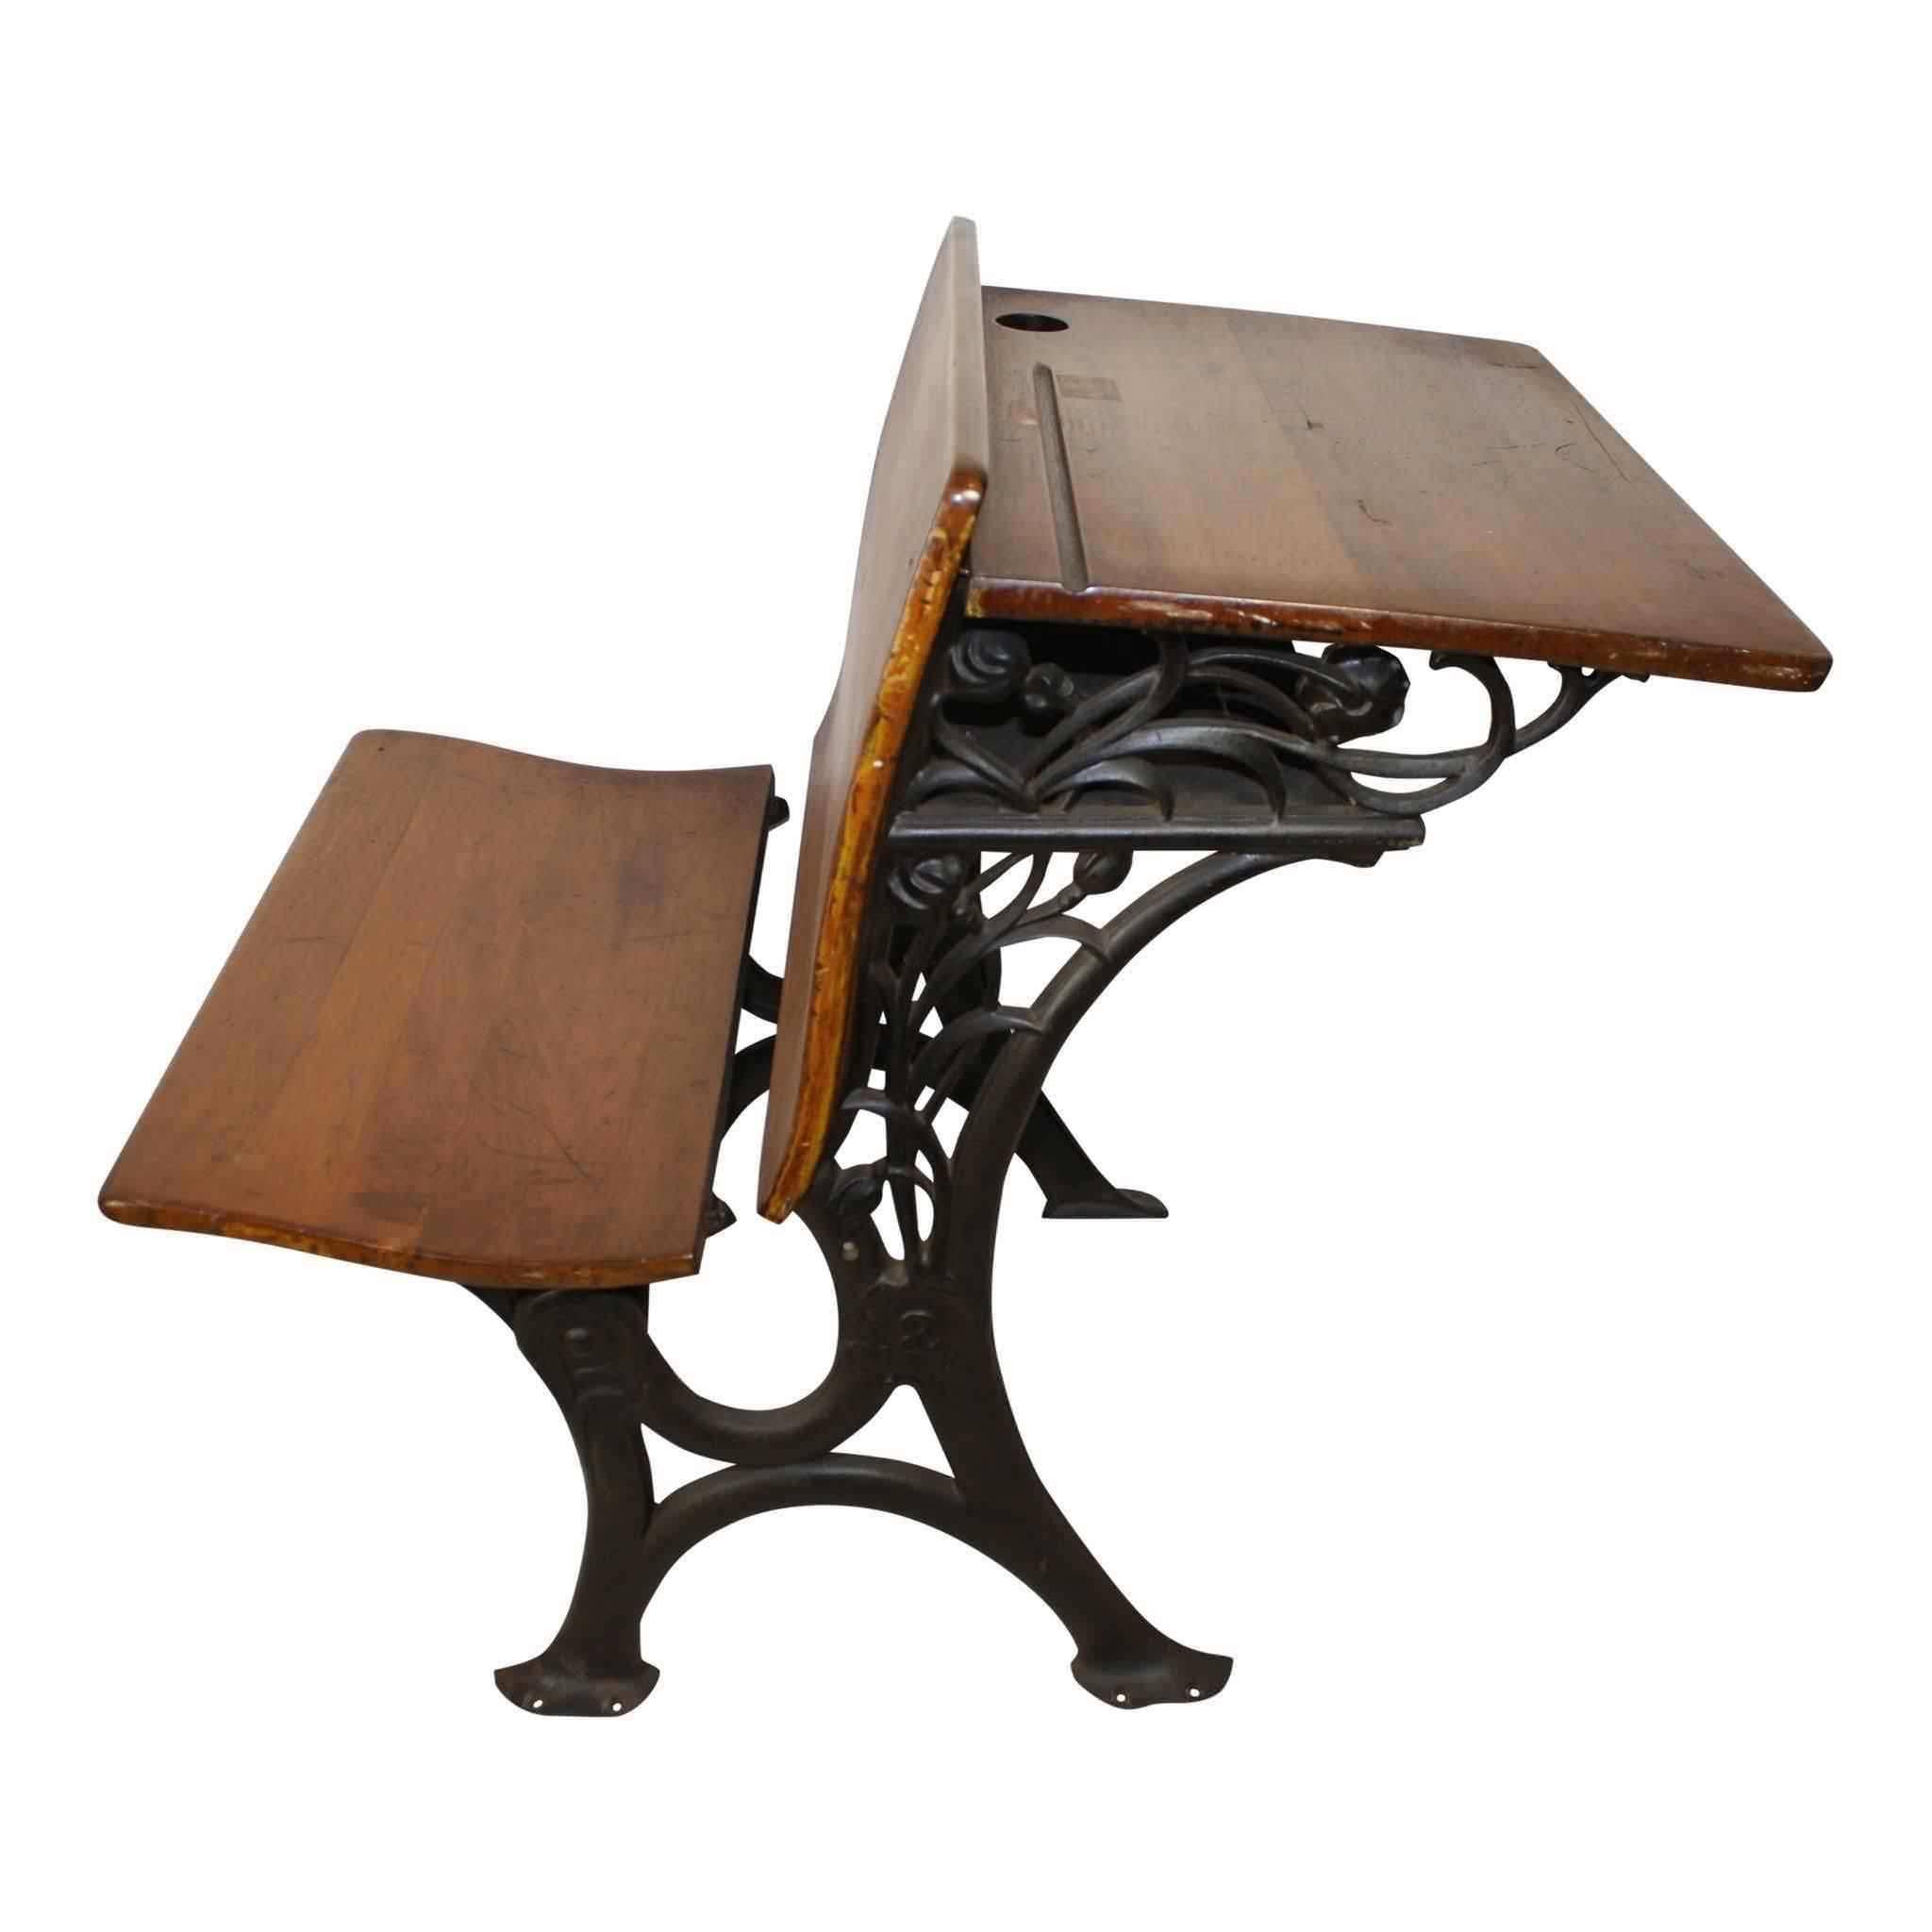 E. H. Stafford Mfg. Co. of Chicago manufactured this child's school desk in the early 1900s. Designed to serve as the desk for the student behind, it has a folding seat, tray, ink well hole, and storage shelf. The desk top is 23.75" x 16".